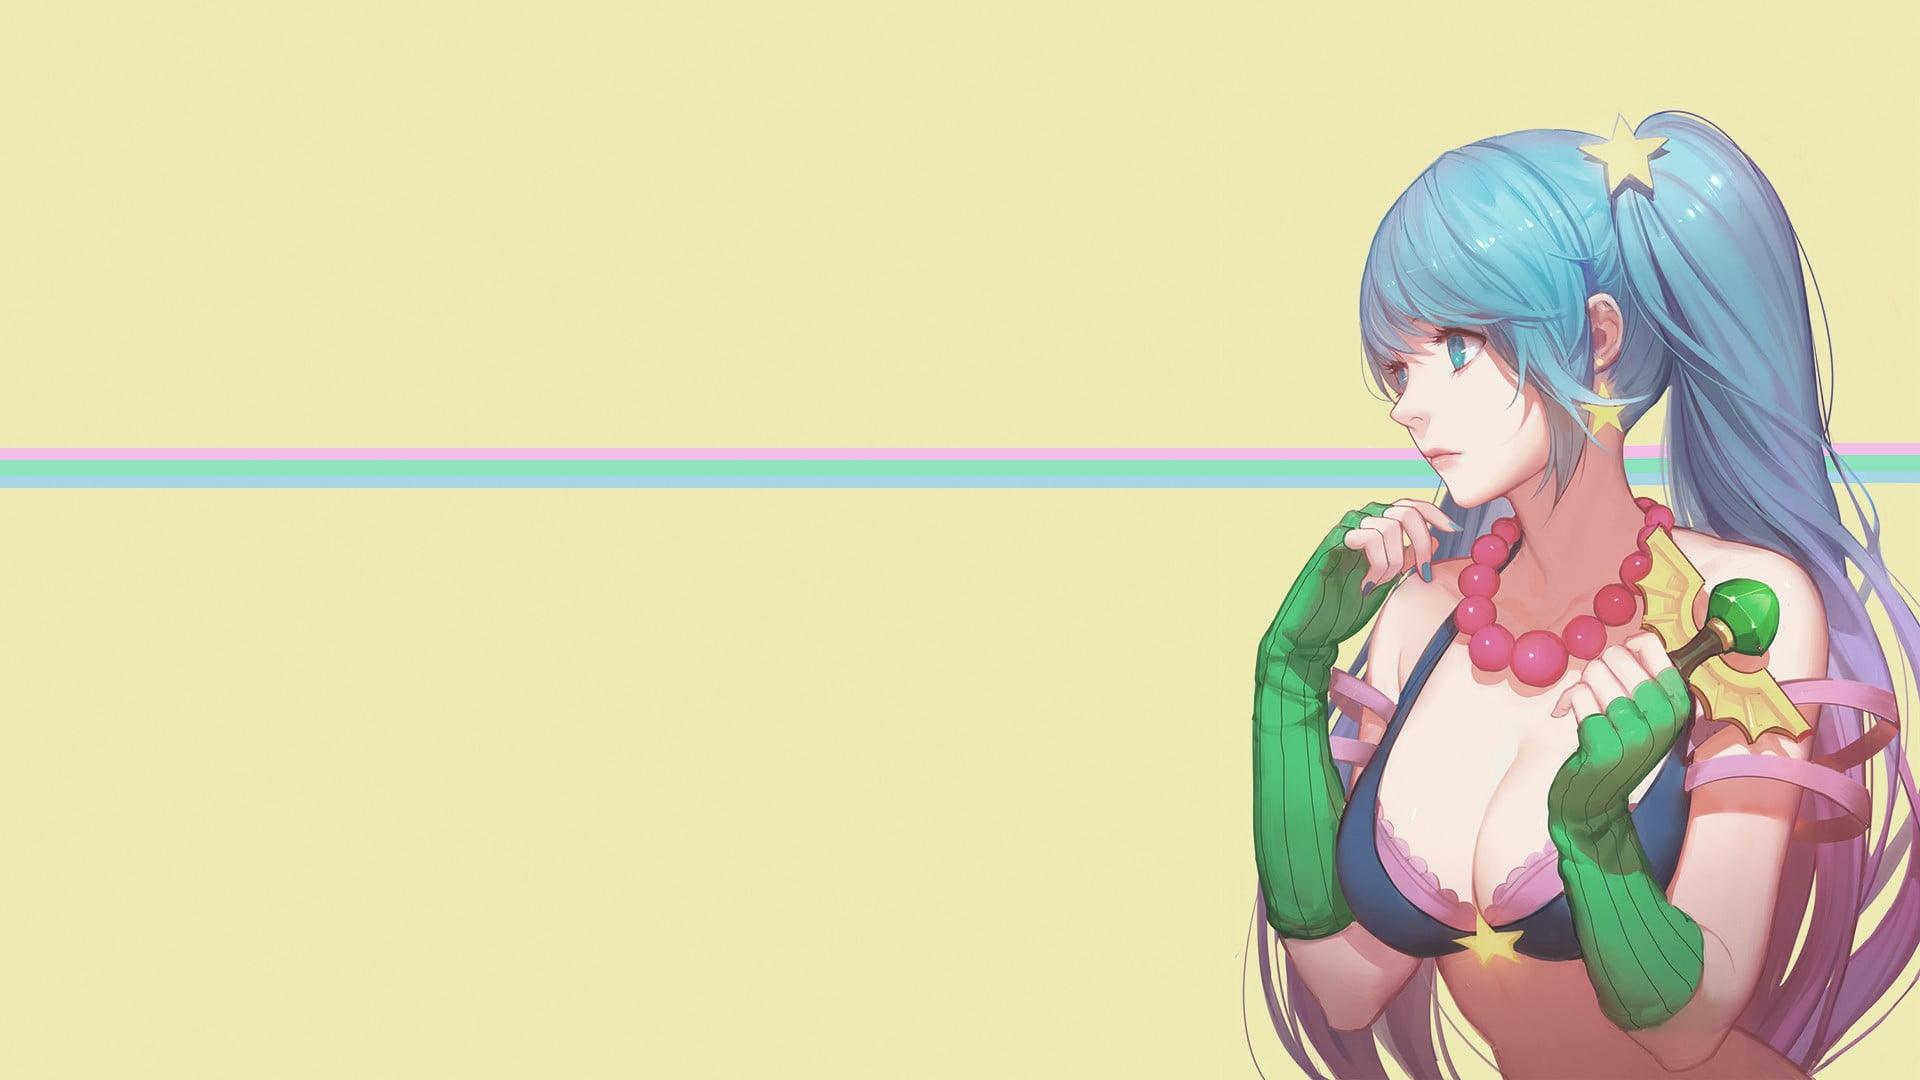 Blue Haired Female Animated Character Illustration Sona League Of Legends League Of Legends